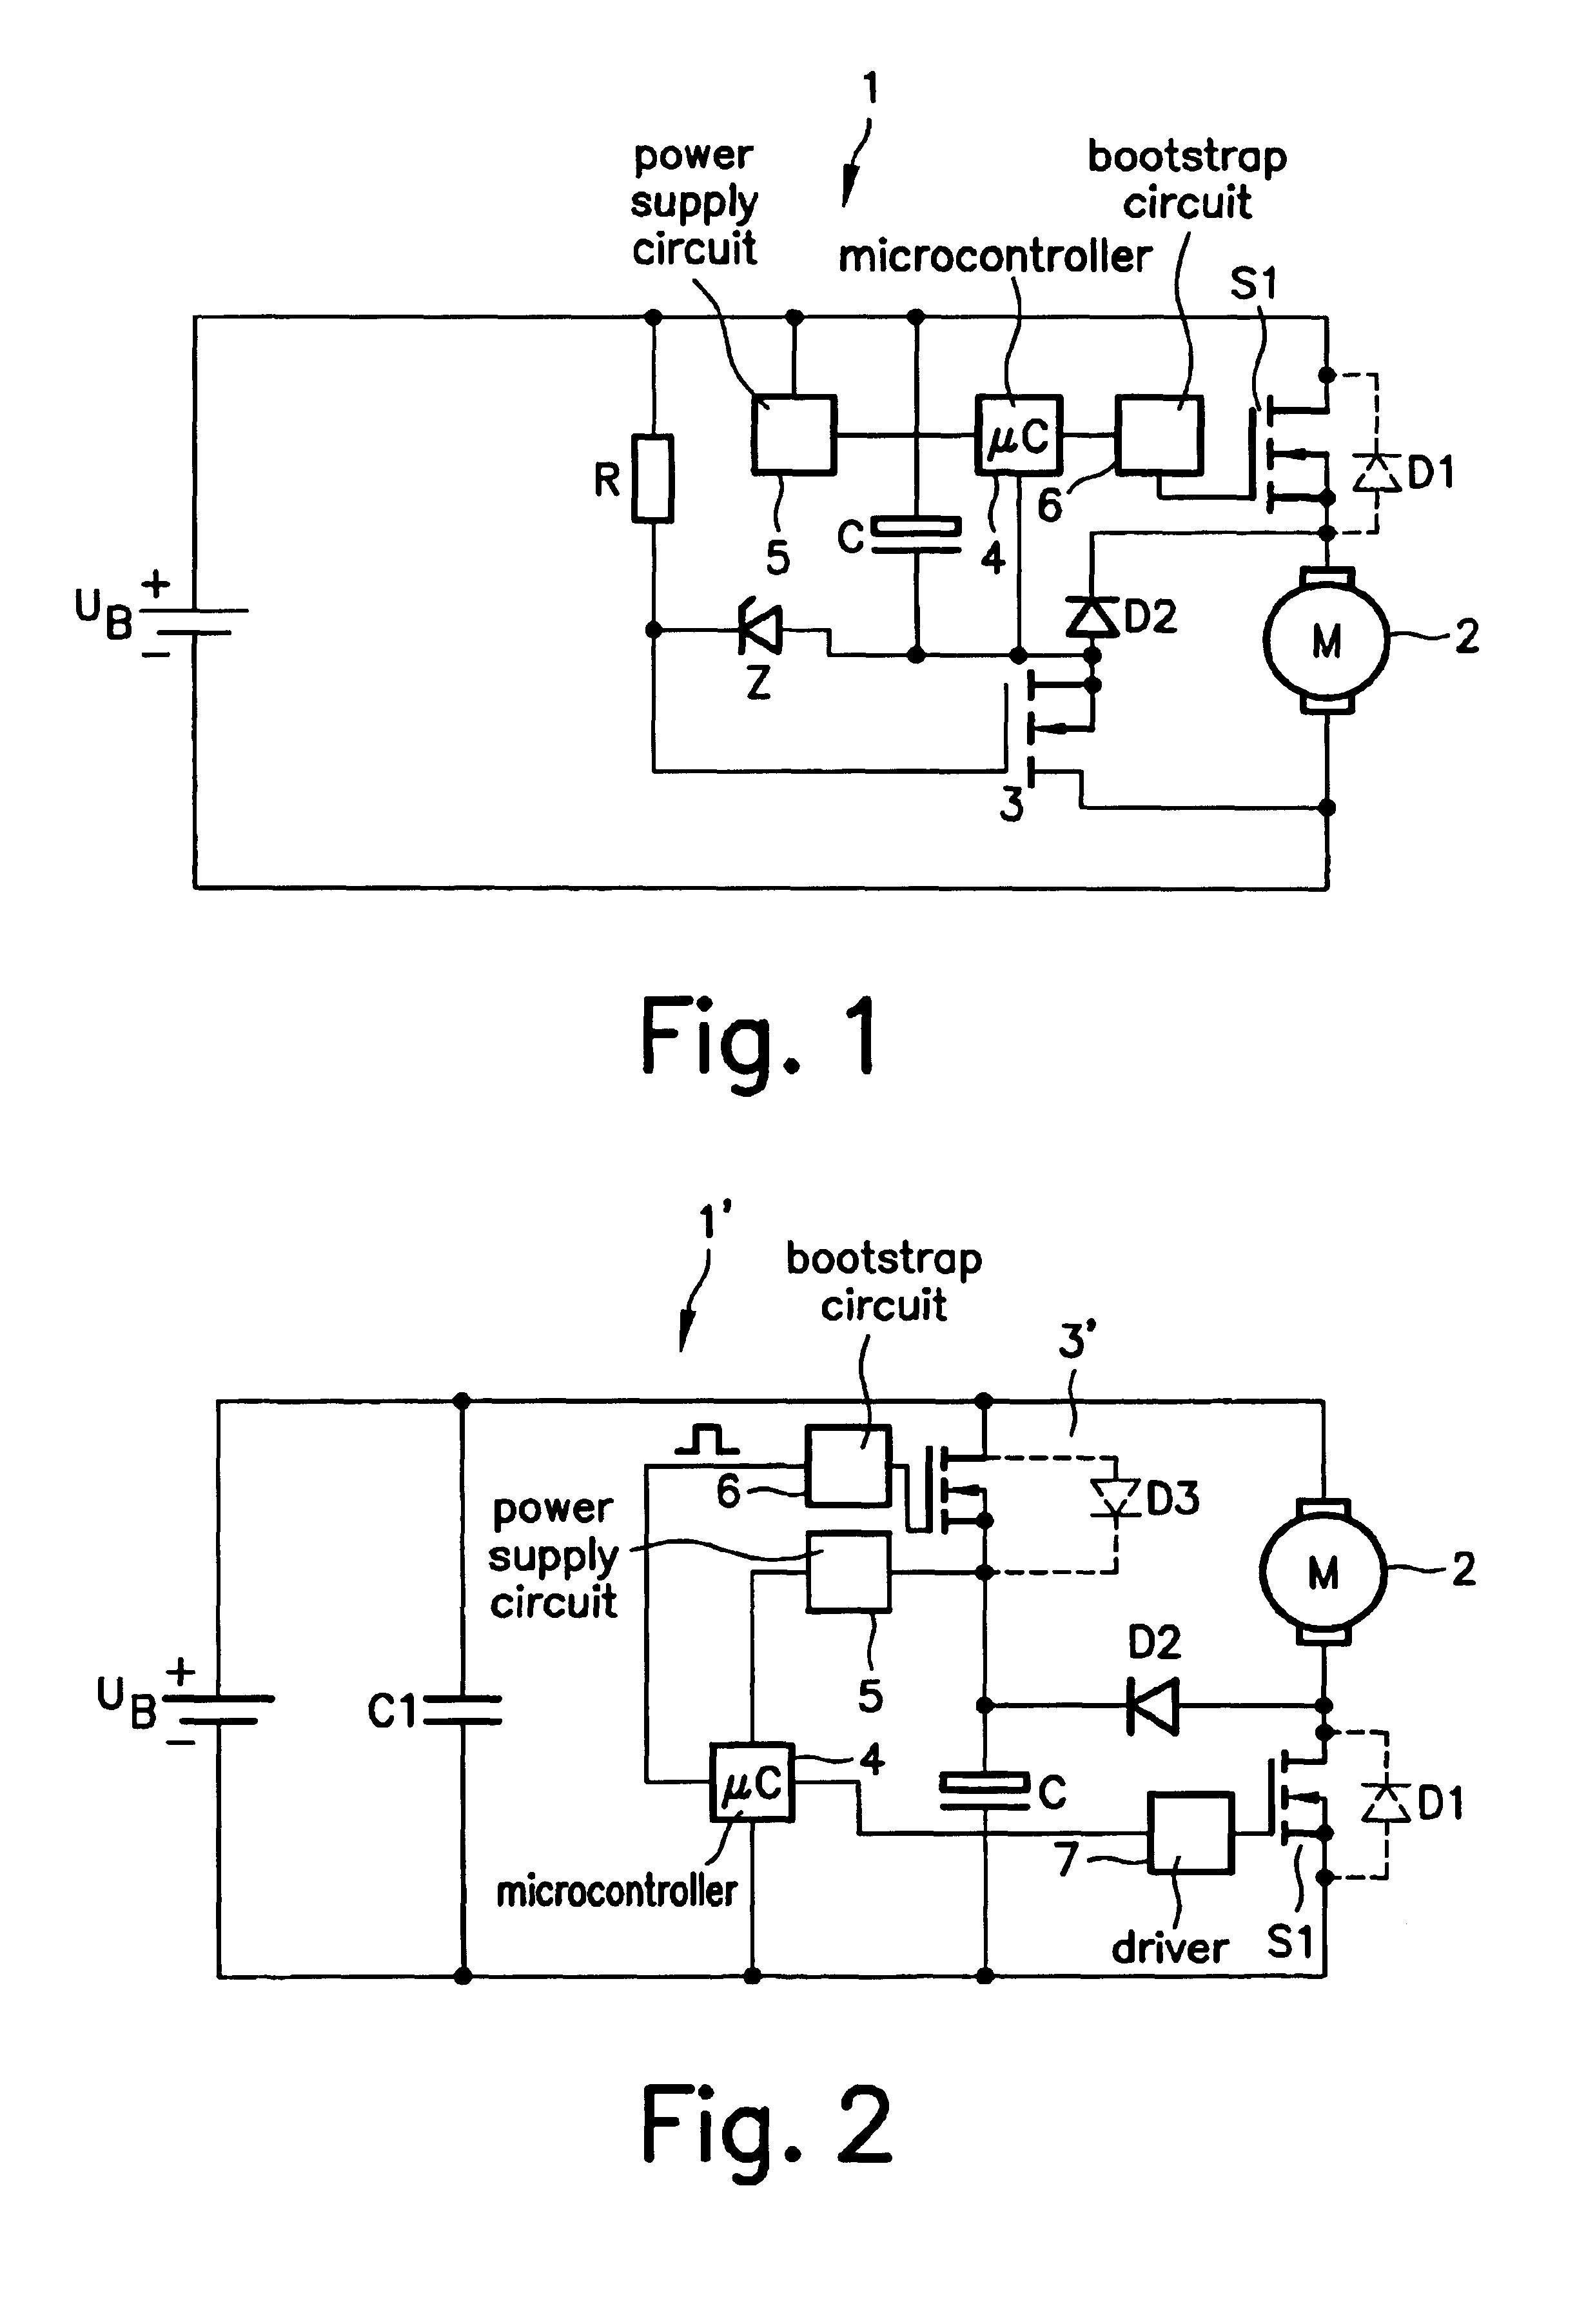 Control circuit for a direct current motor